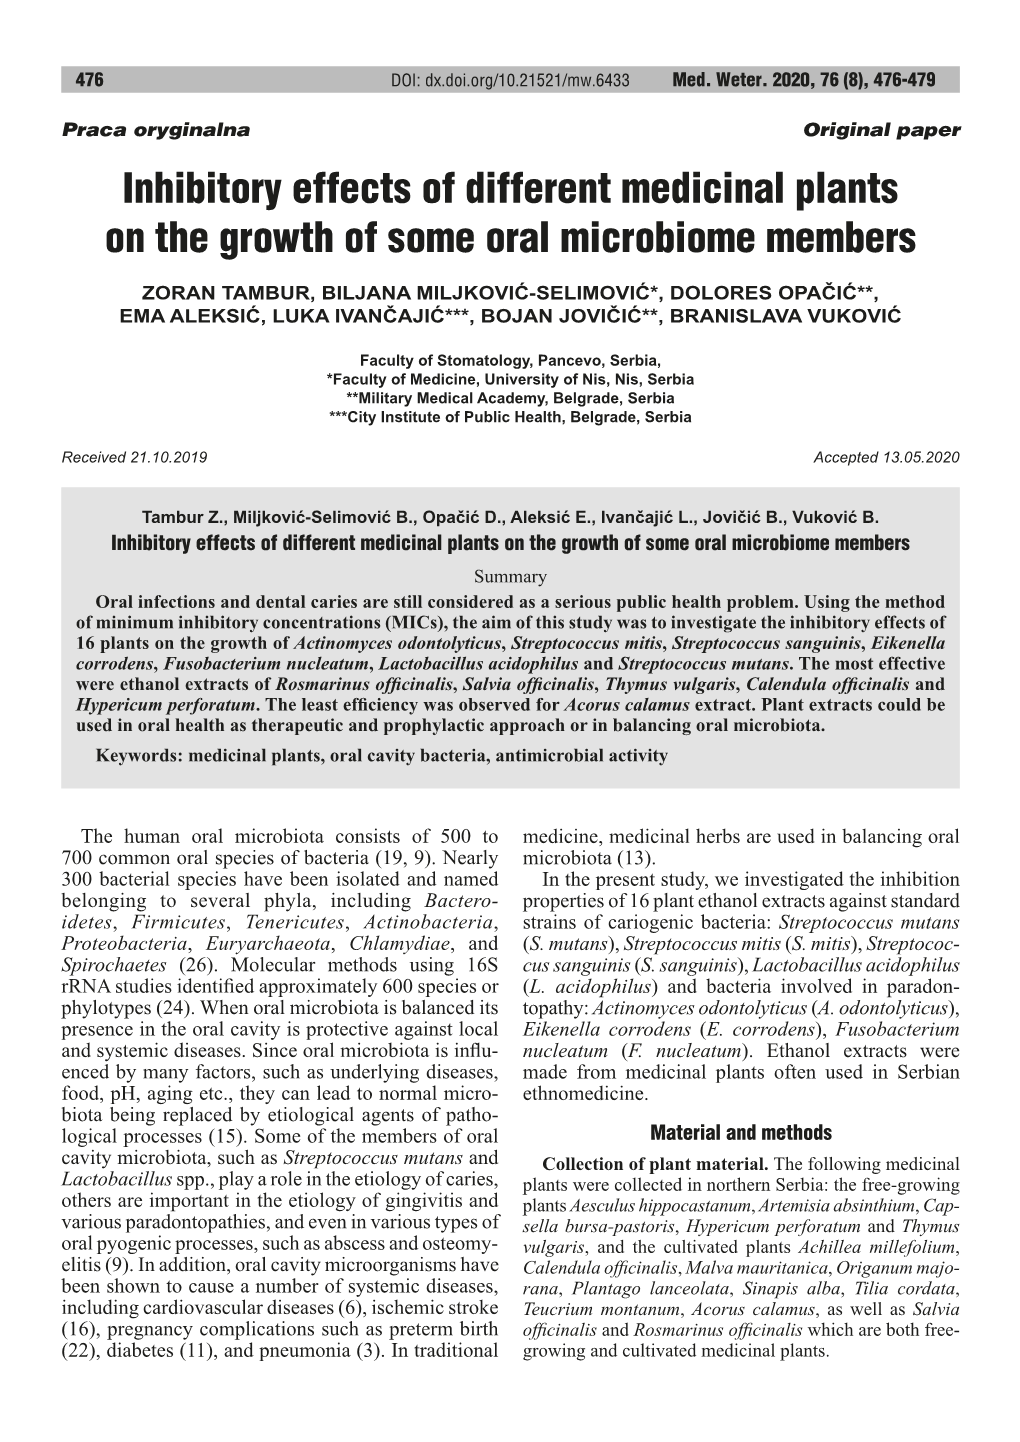 Inhibitory Effects of Different Medicinal Plants on the Growth of Some Oral Microbiome Members